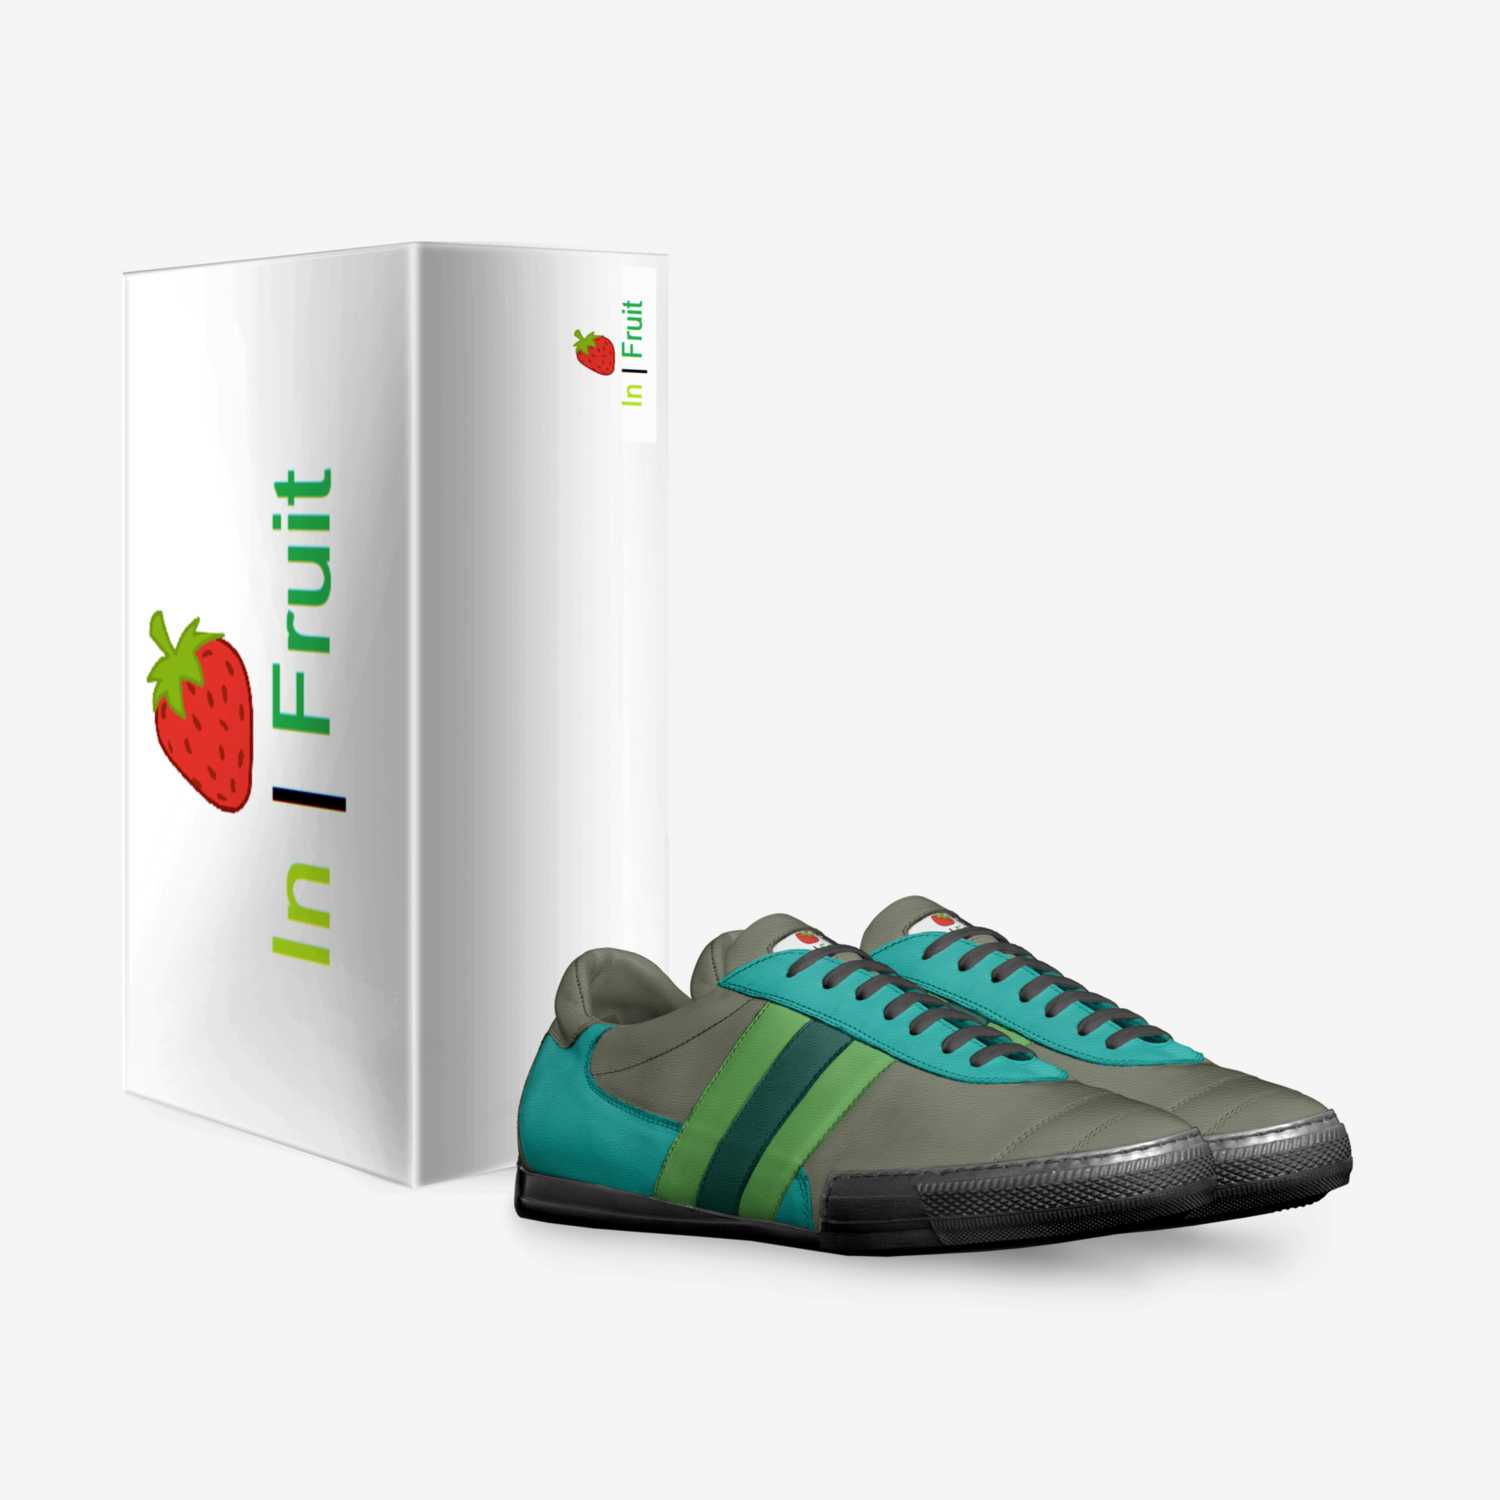 IN | FRUIT custom made in Italy shoes by Jkl | Box view